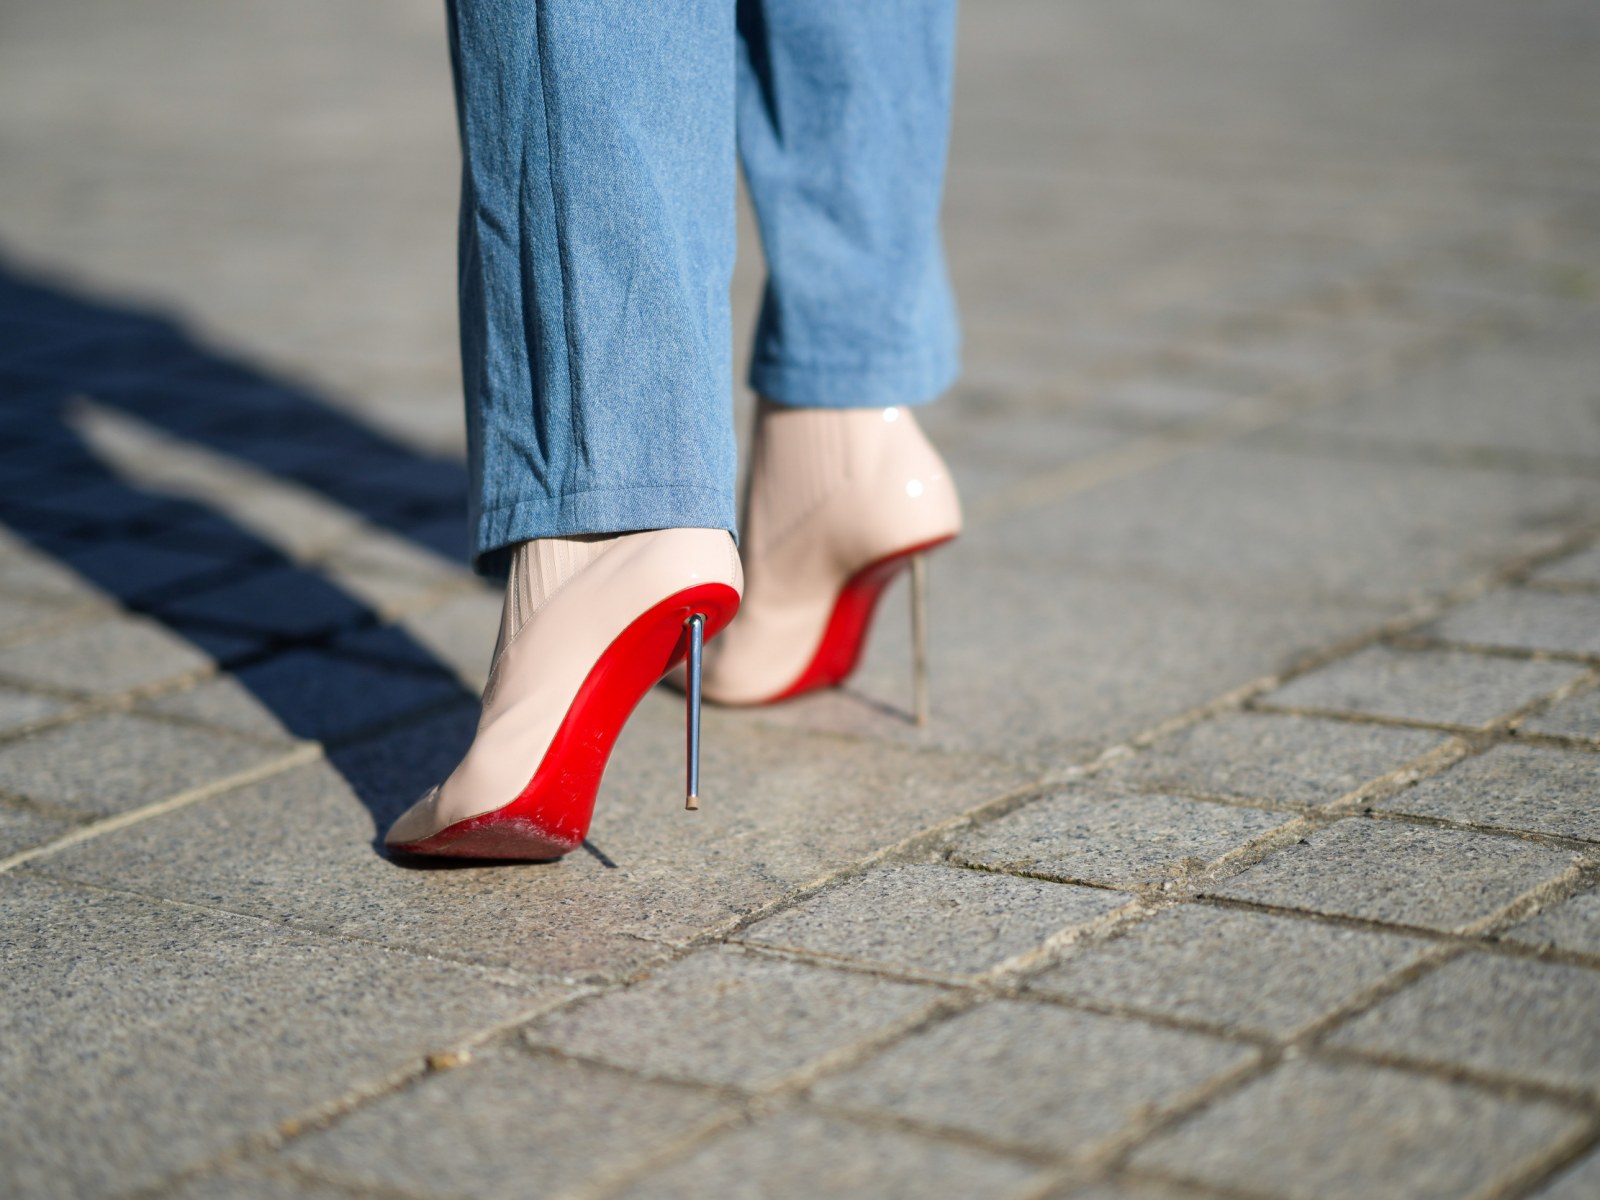 We Tried Louboutin Red Bottoms For You – Here's Our Honest Review!